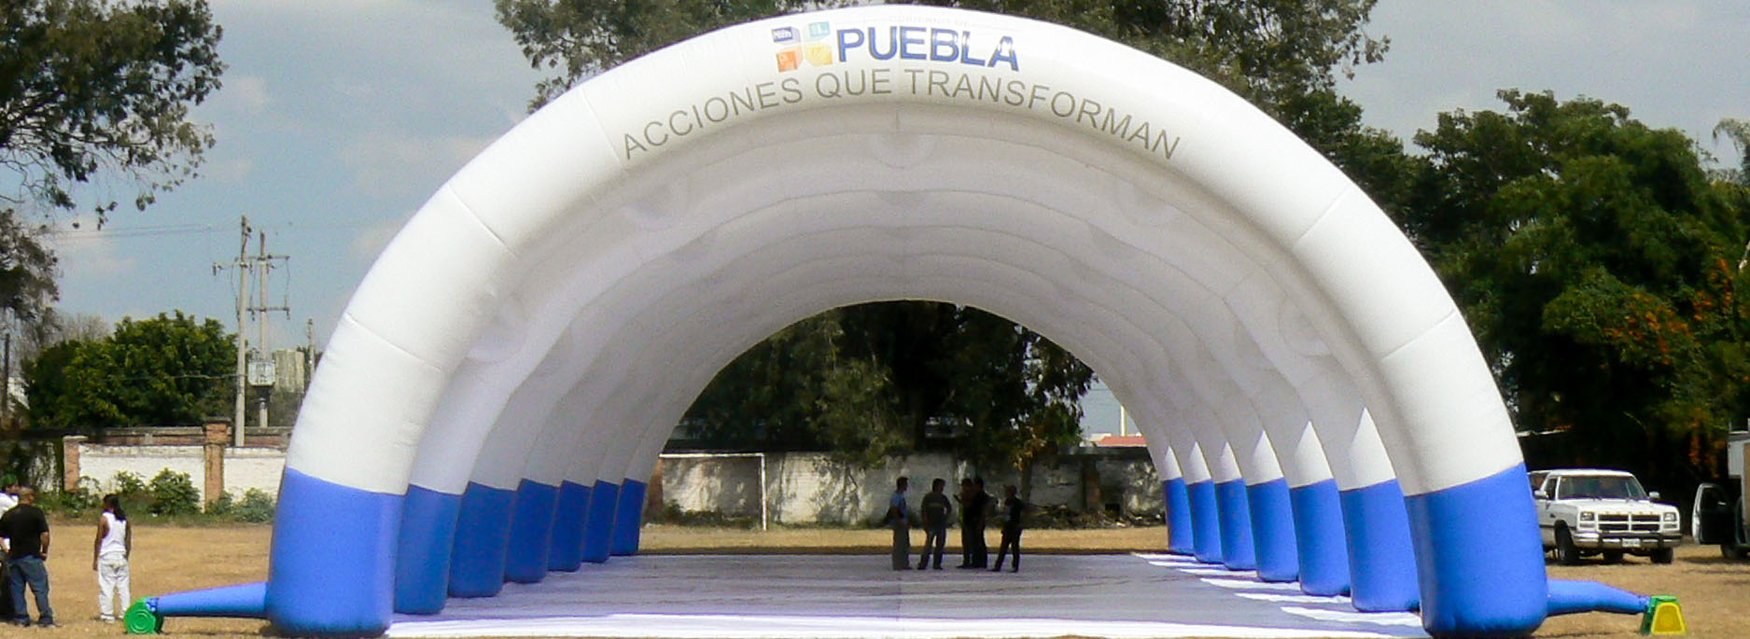 Puebla custom printed large inflatable tunnel for the State of Puebla in Mexico